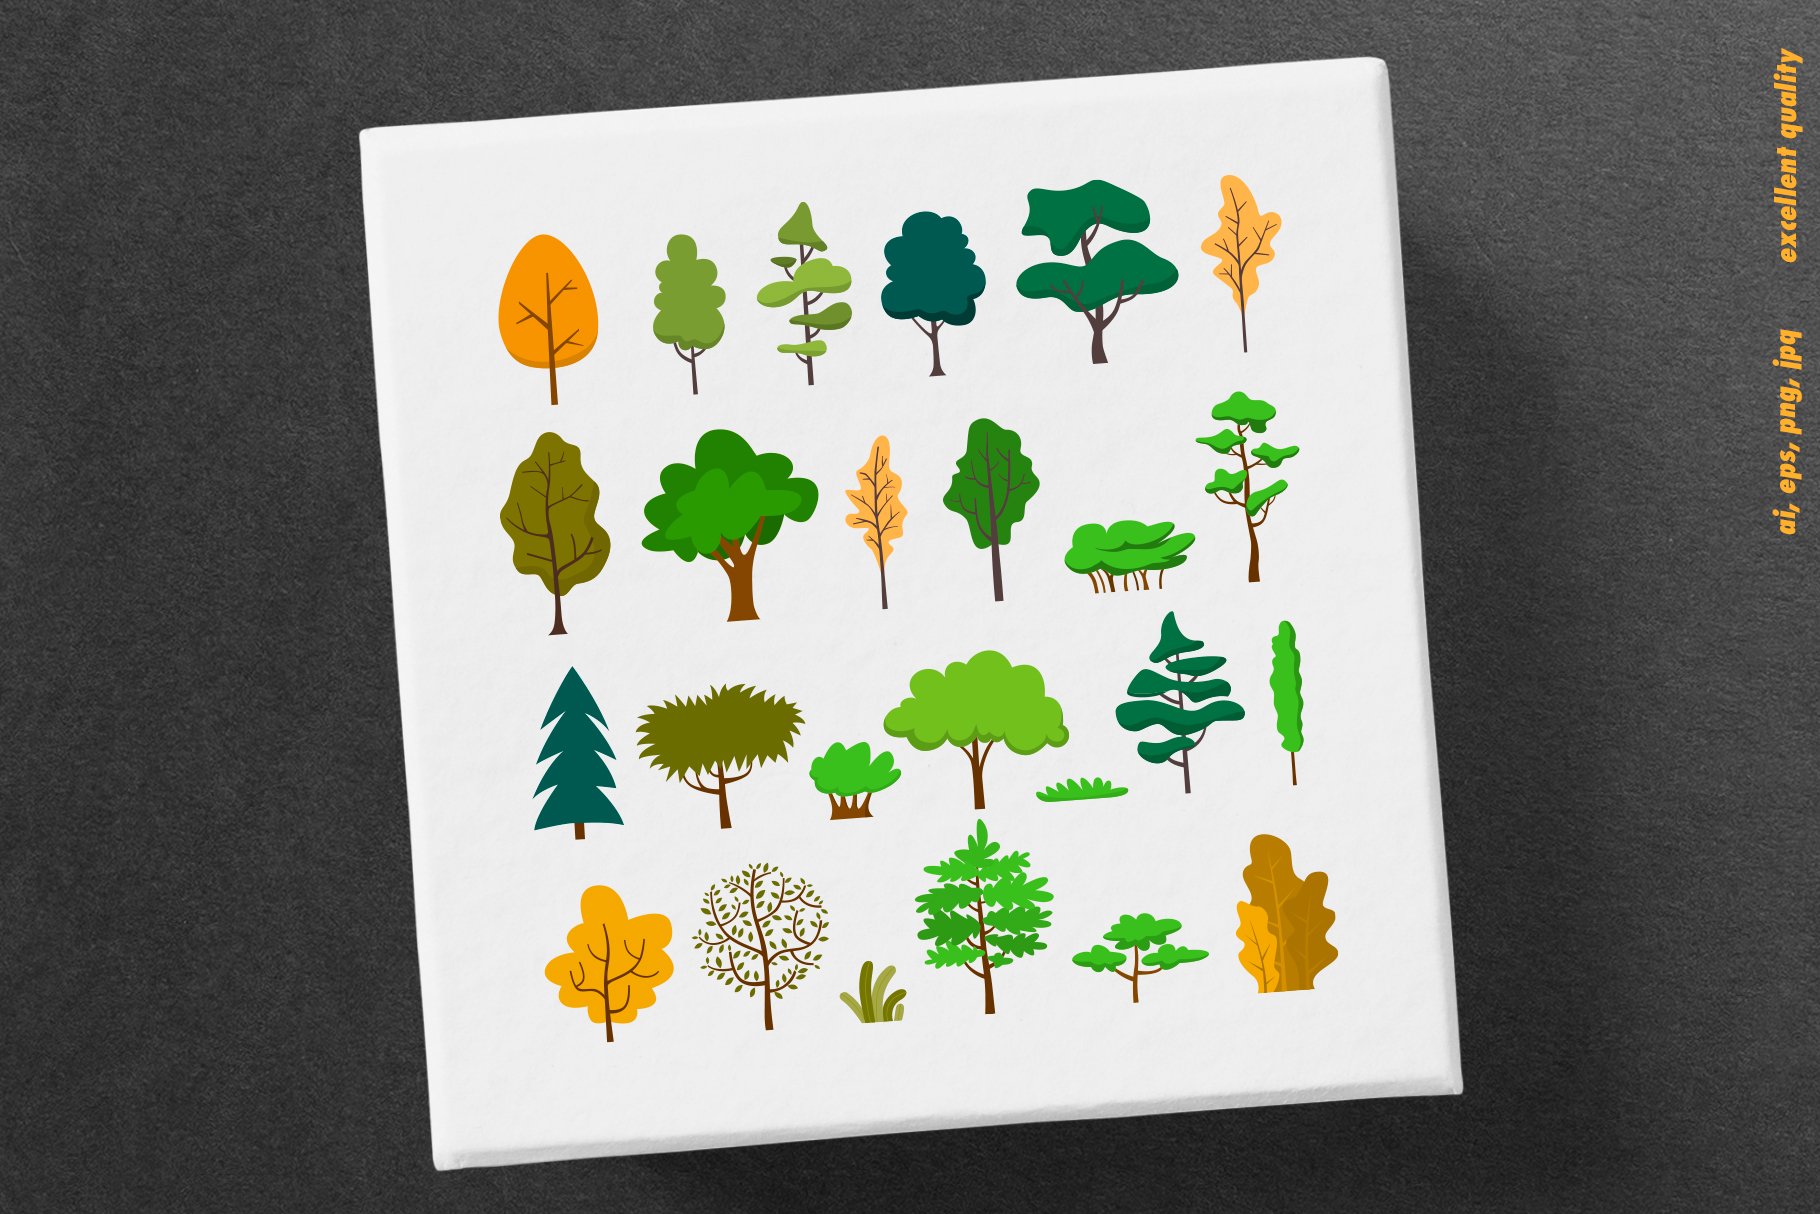 Card with a variety of trees on it.